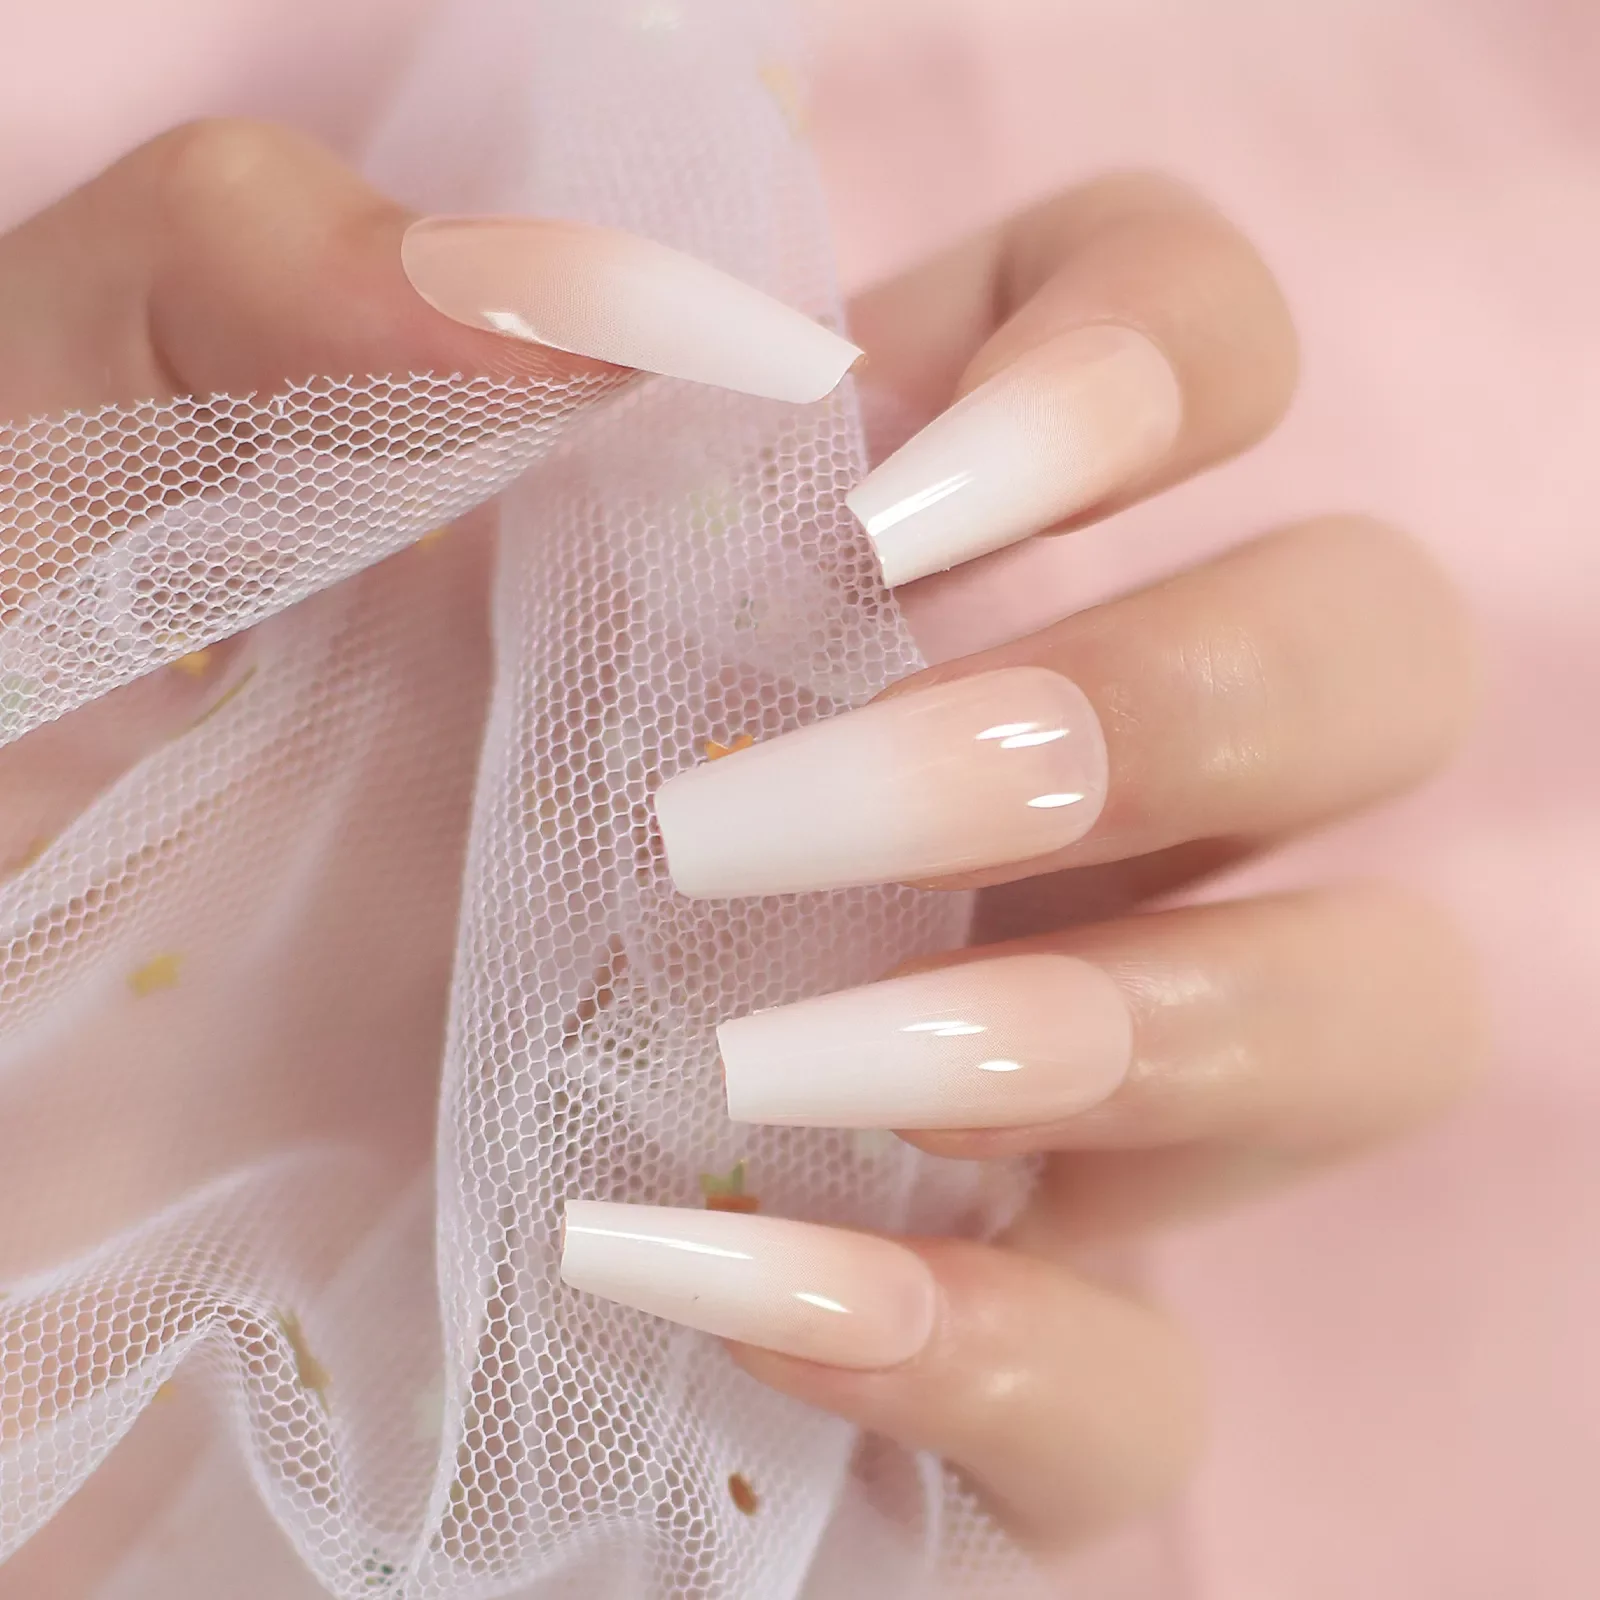 

NEW IN Glossy Ombre Pink Nude White French Ballerina Coffin False Nail Gradient Press on Reusable Ballet Fake Nails Tips